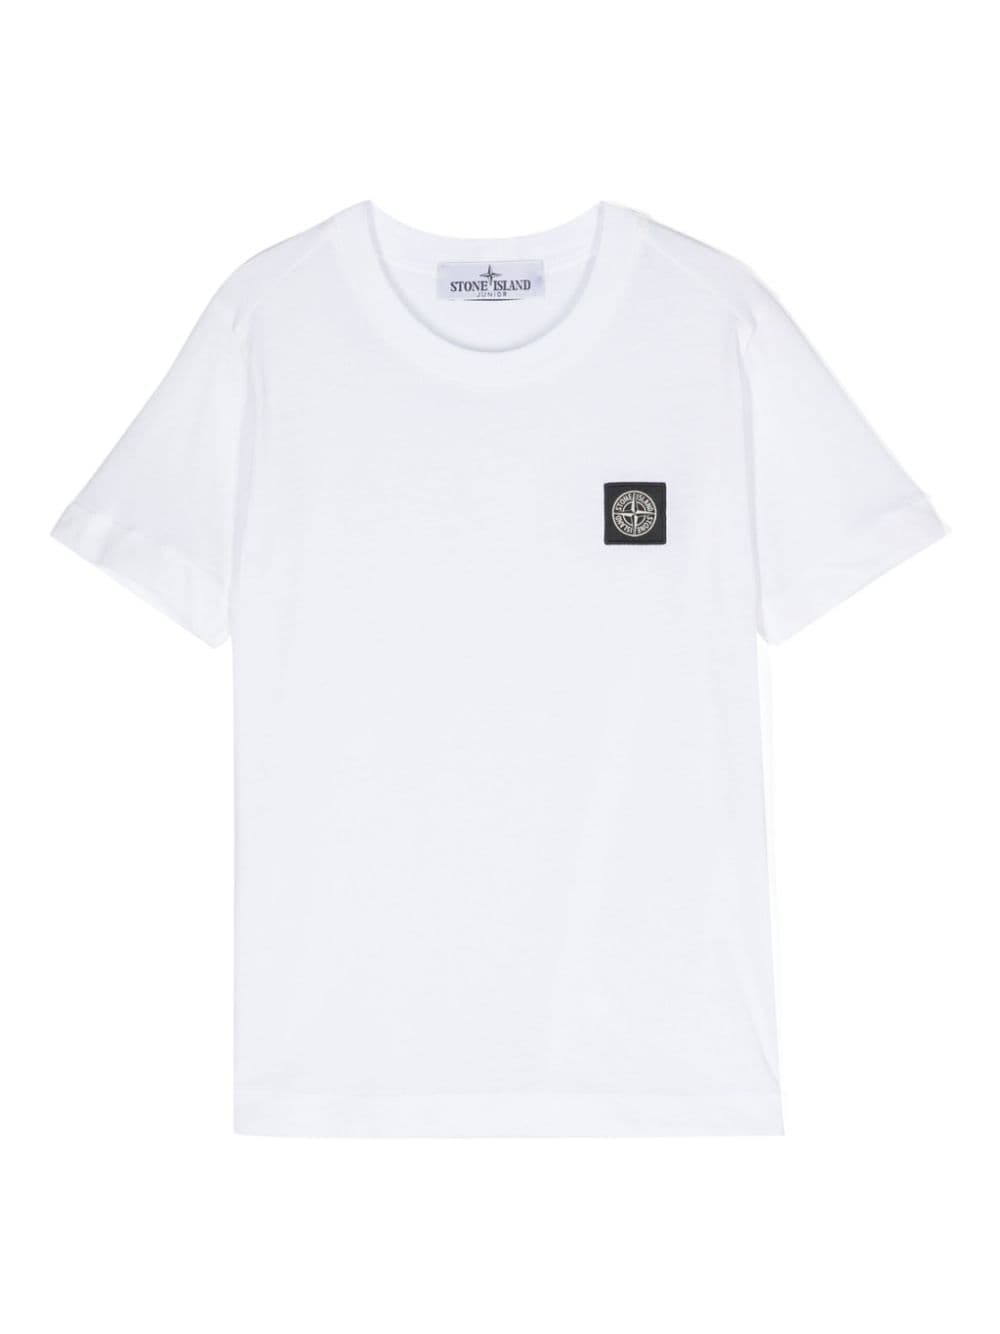 Cotton jersey T-shirt<BR/><BR/><BR/>